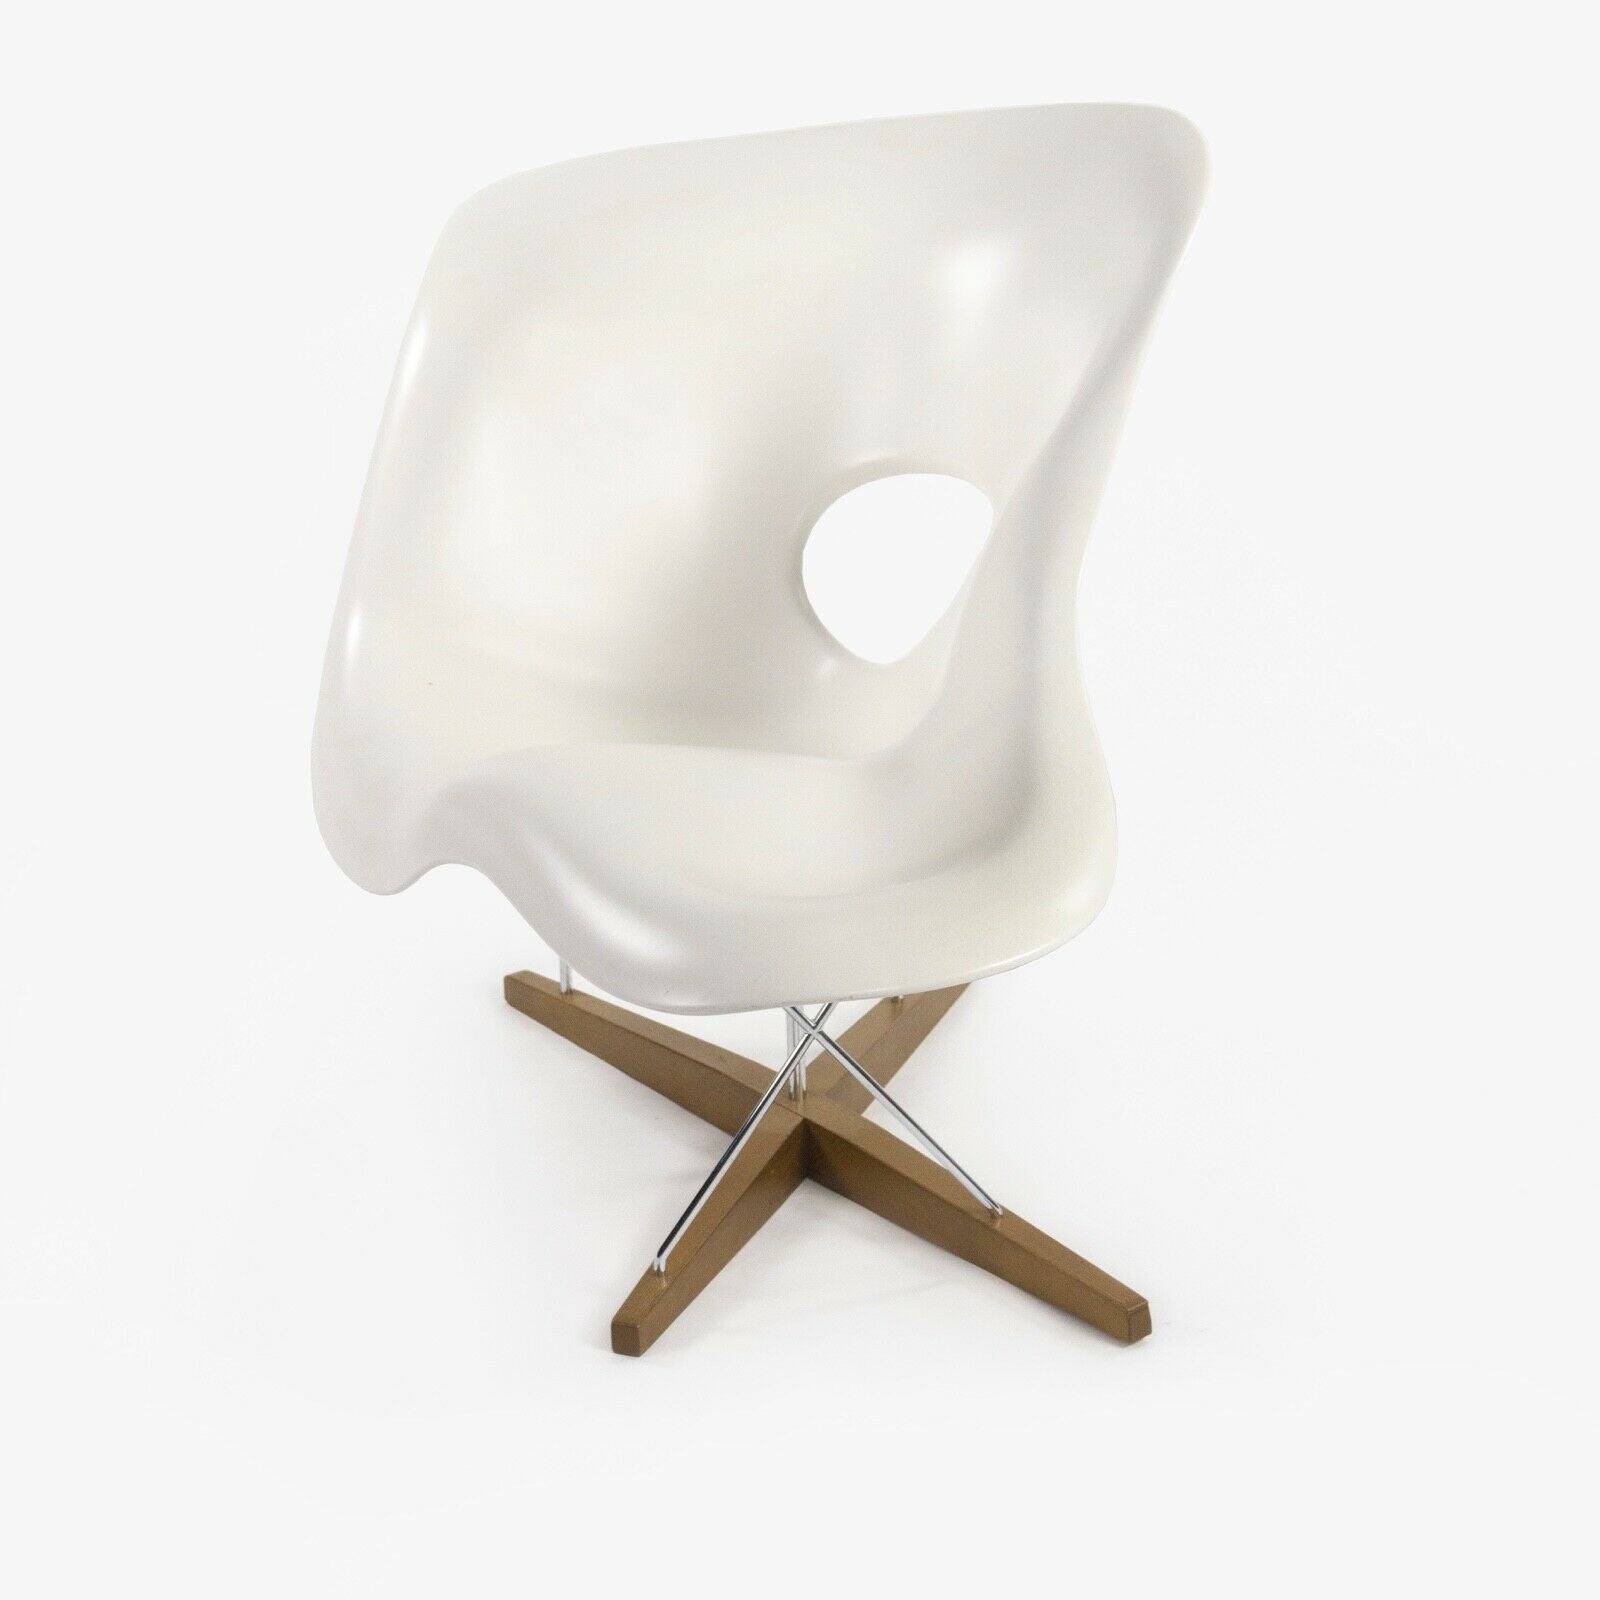 2005 La Chaise Lounge Chair by Charles and Ray Eames for Vitra Herman Miller